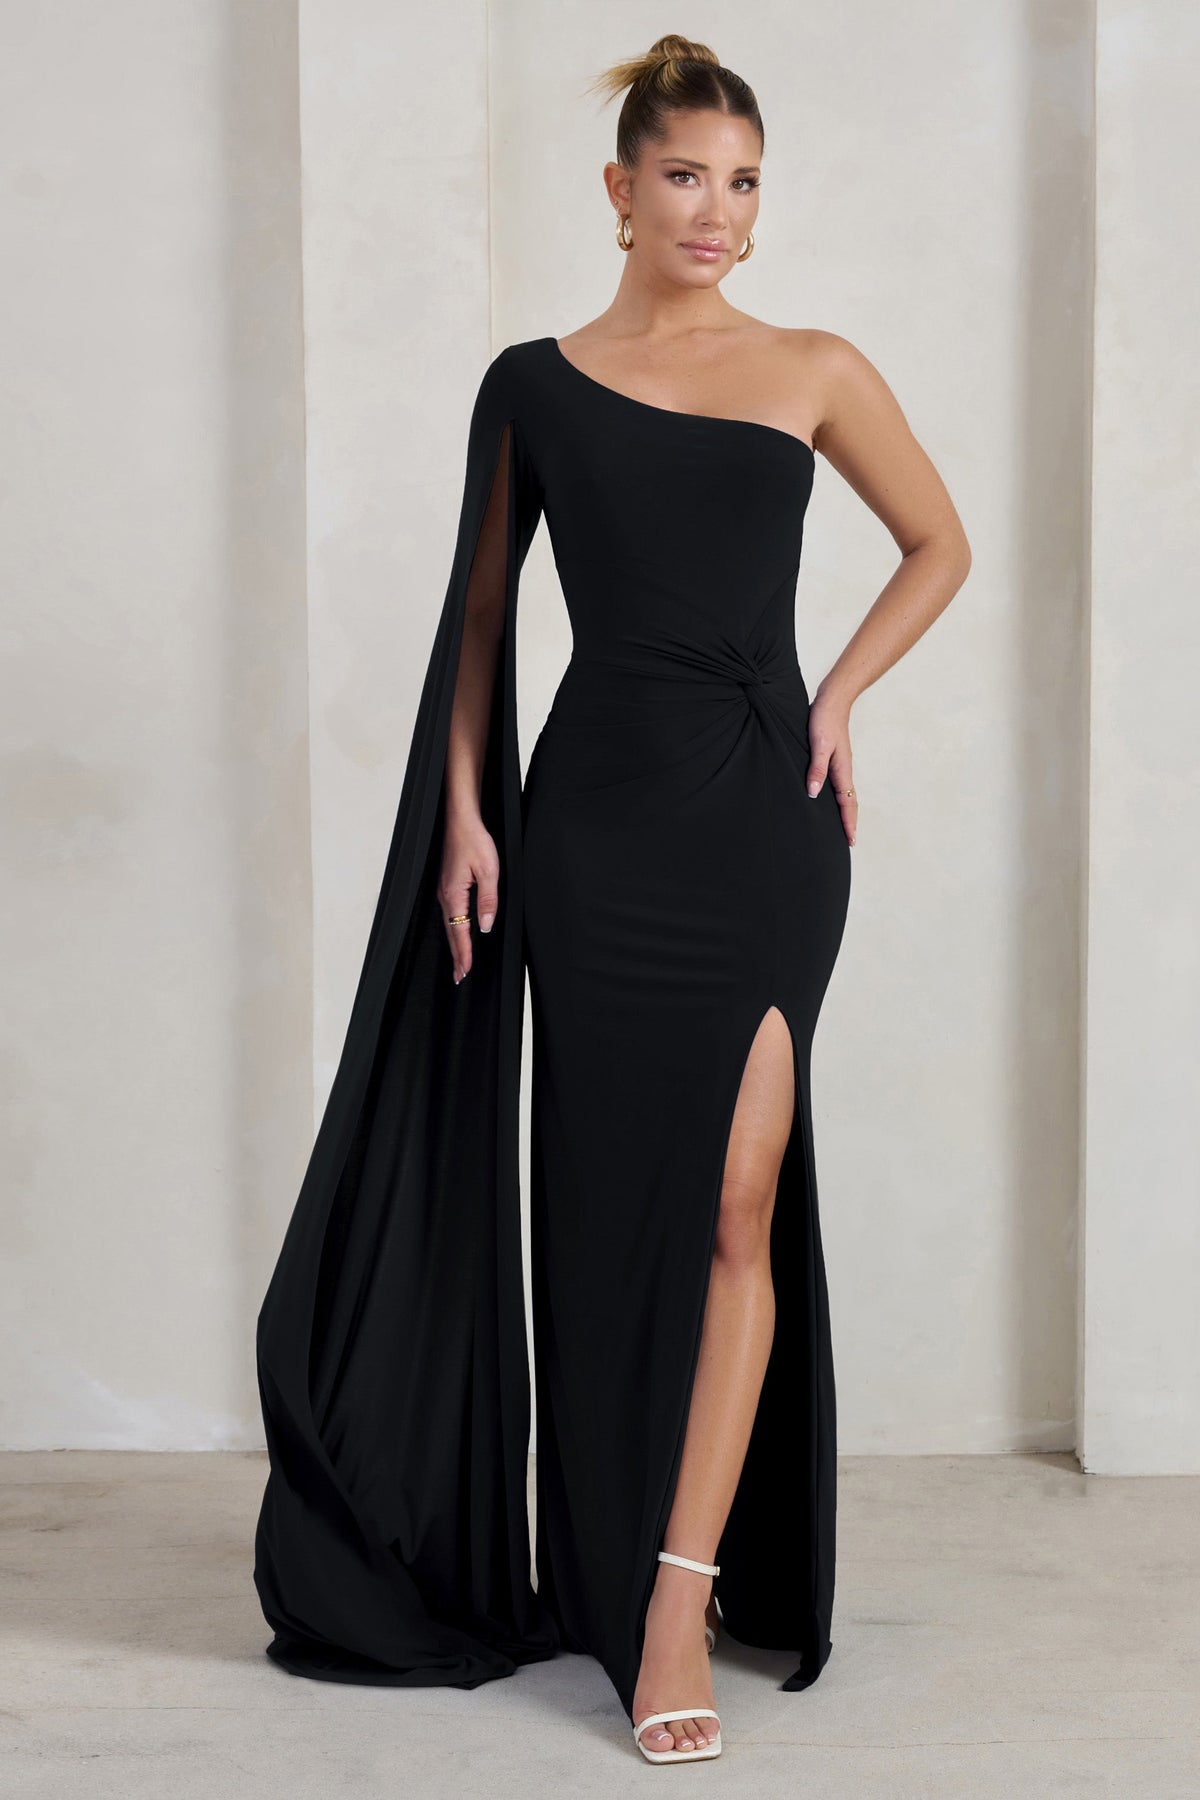 Betty Black High Neck Long Sleeve Maxi Dress with Feather Cuffs